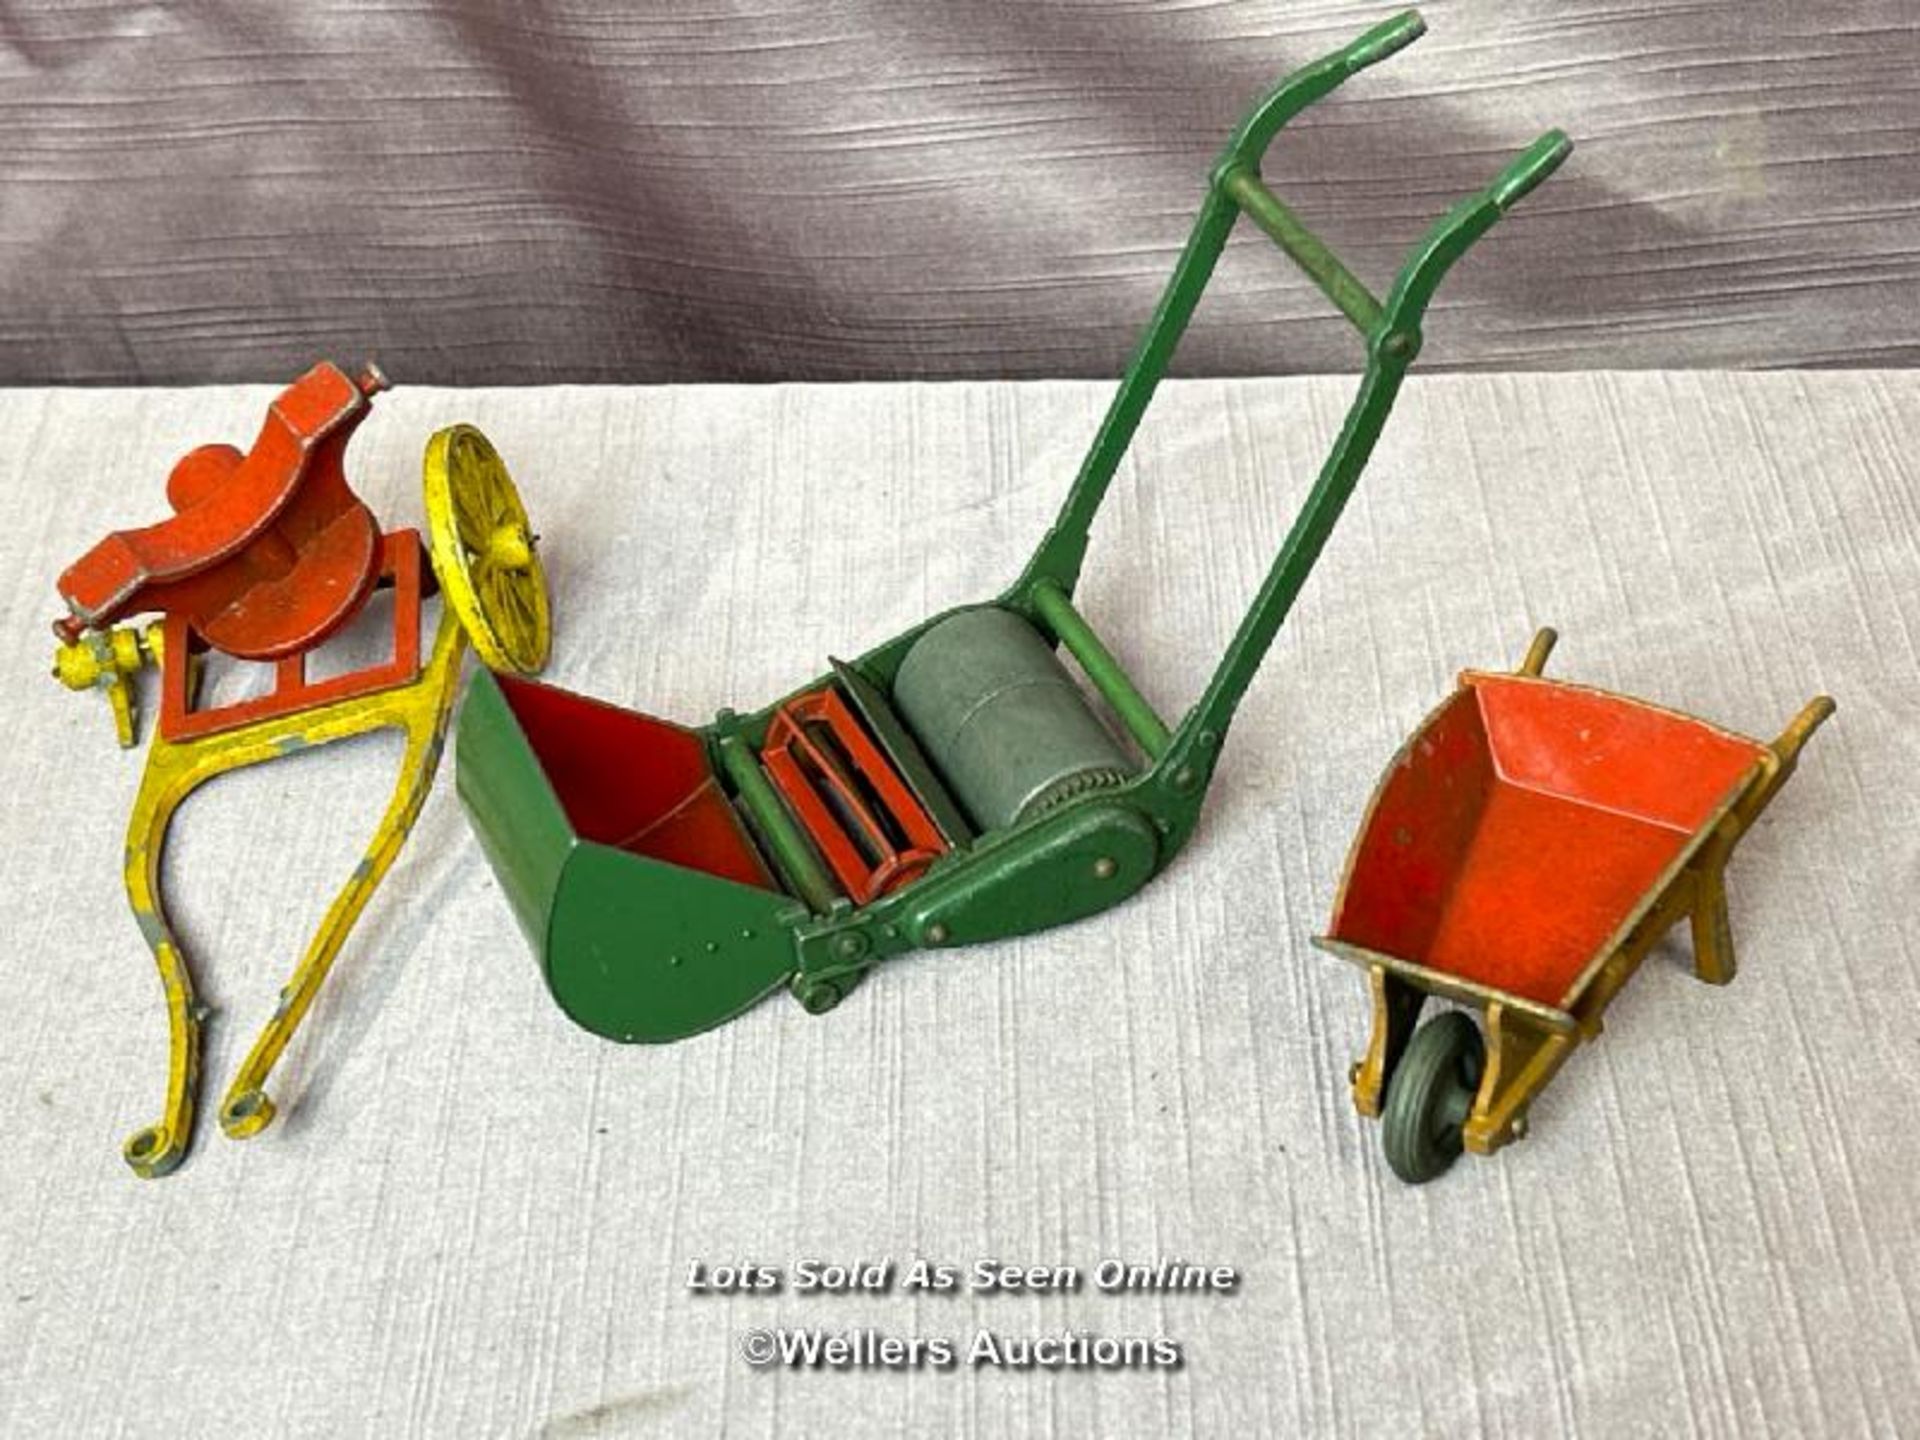 DINKY SUPERTOYS GARDEN PUSHALONG LAWN MOWER WITH ROLLER, TOGETHER WITH A DINKY DIE CAST